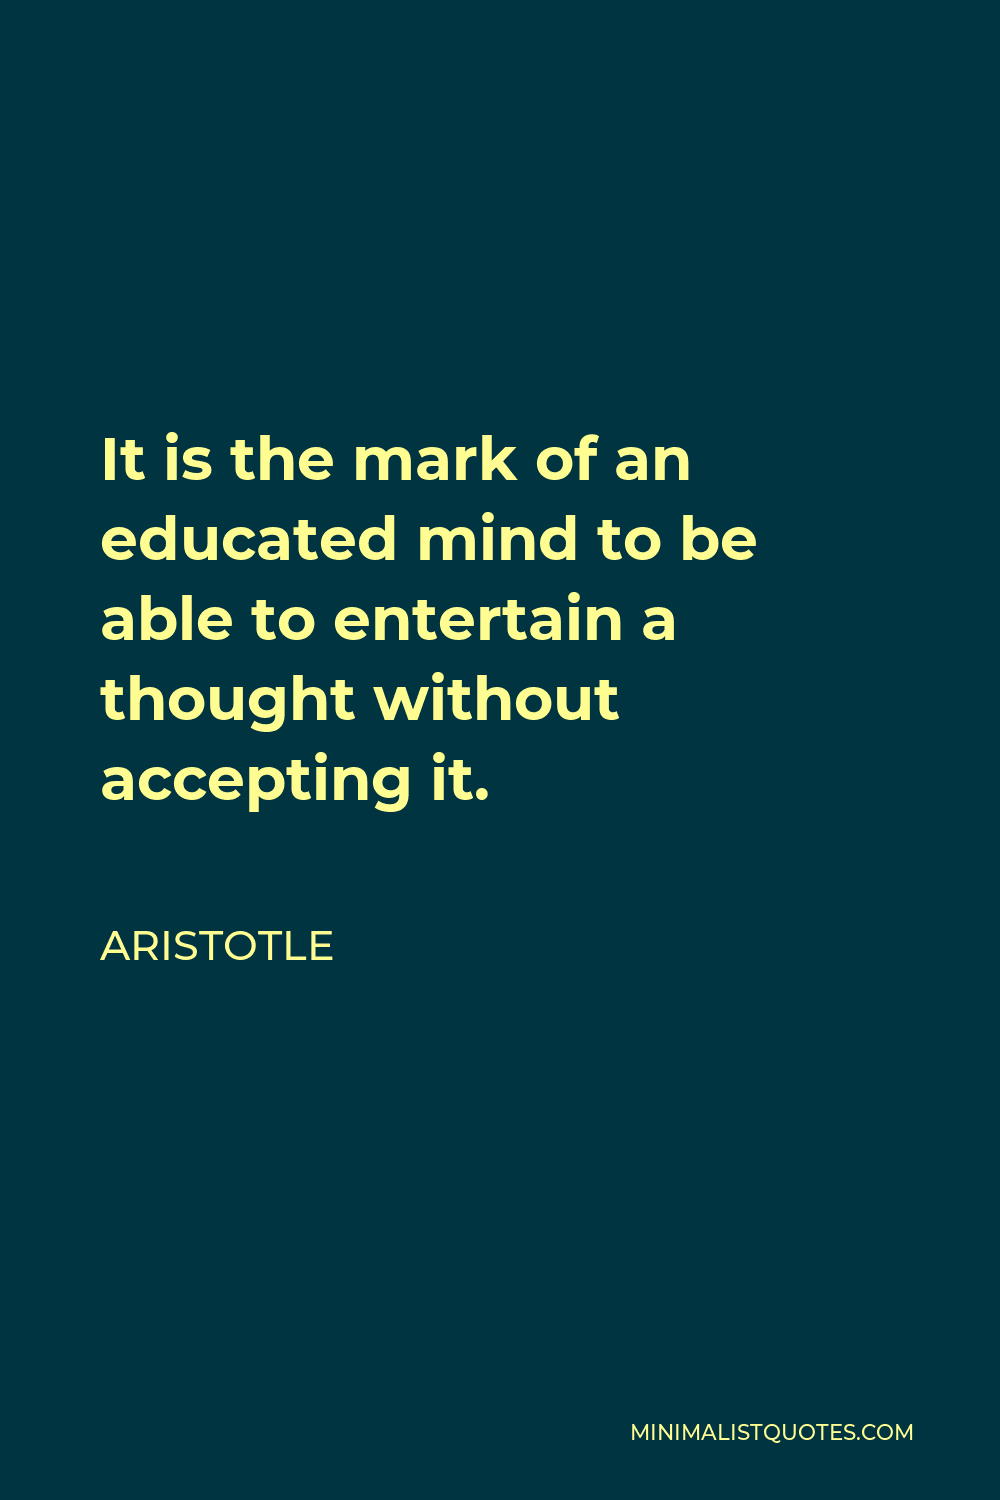 Aristotle Quote - It is the mark of an educated mind to be able to entertain a thought without accepting it.